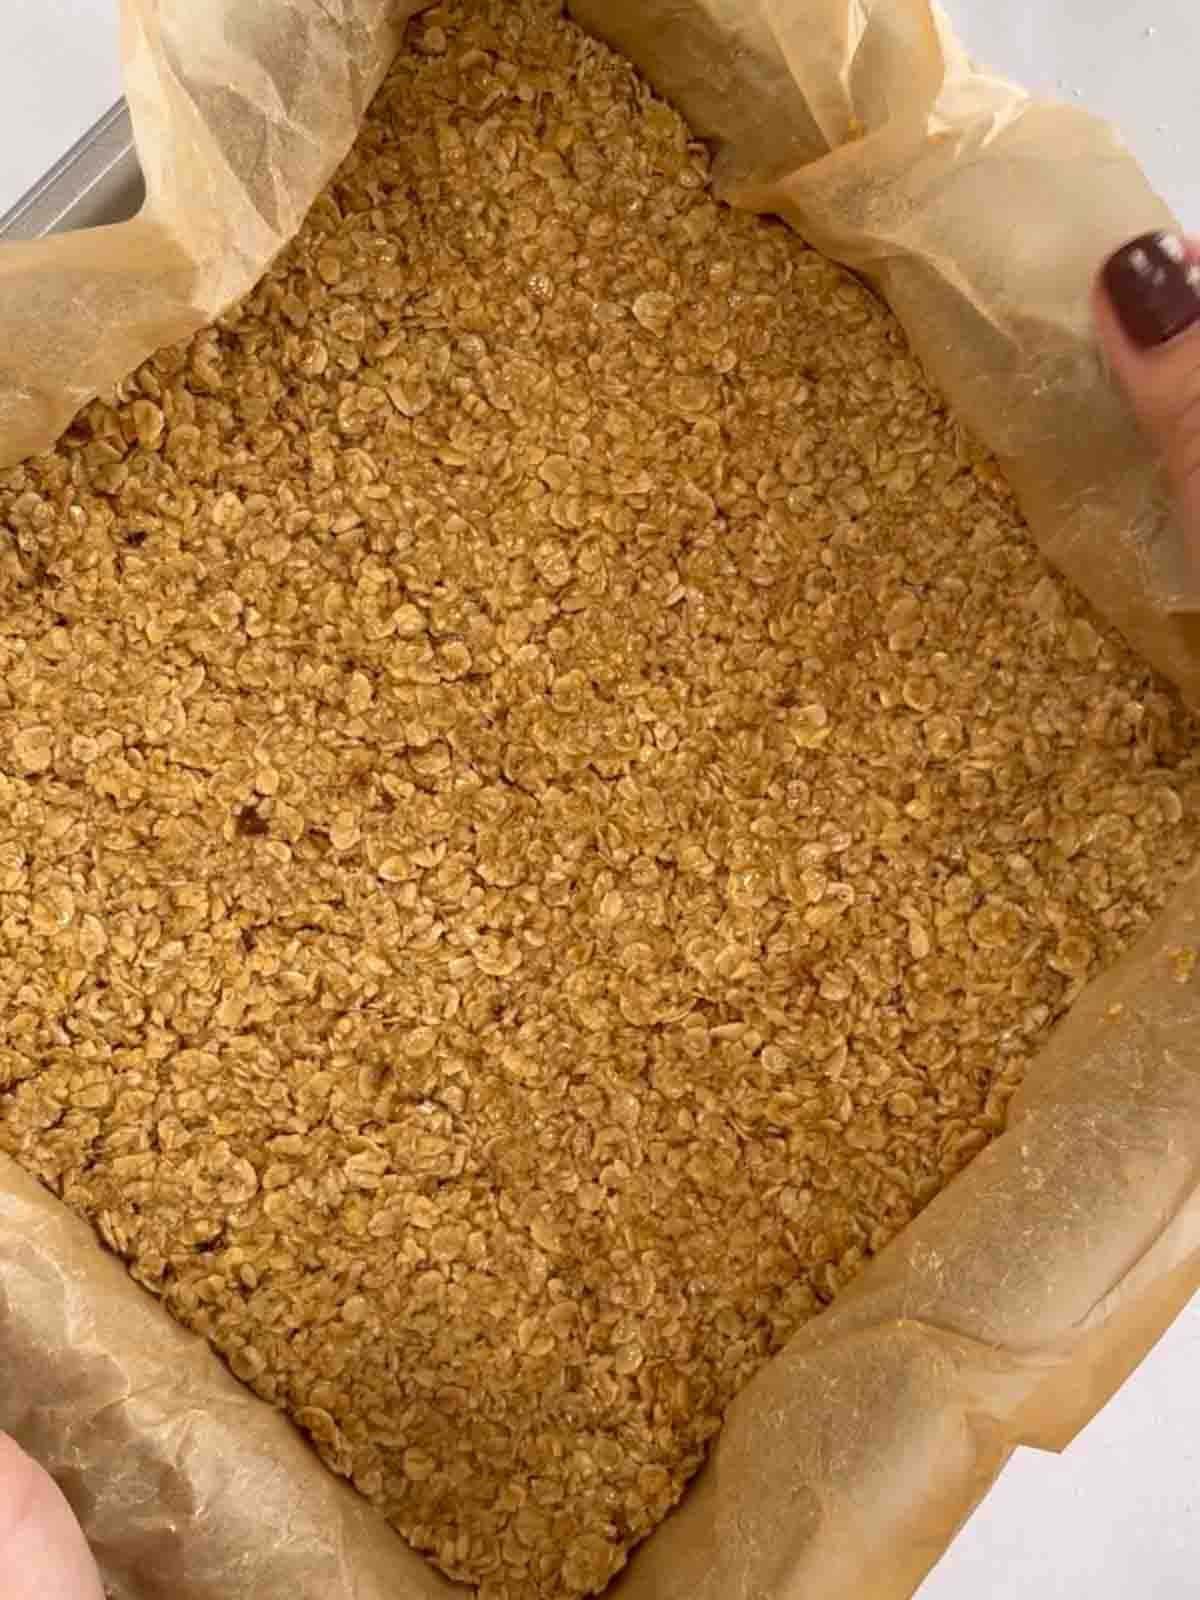 Oat mixture pressed into a baking tray for step 3 in the recipe for flapjacks.